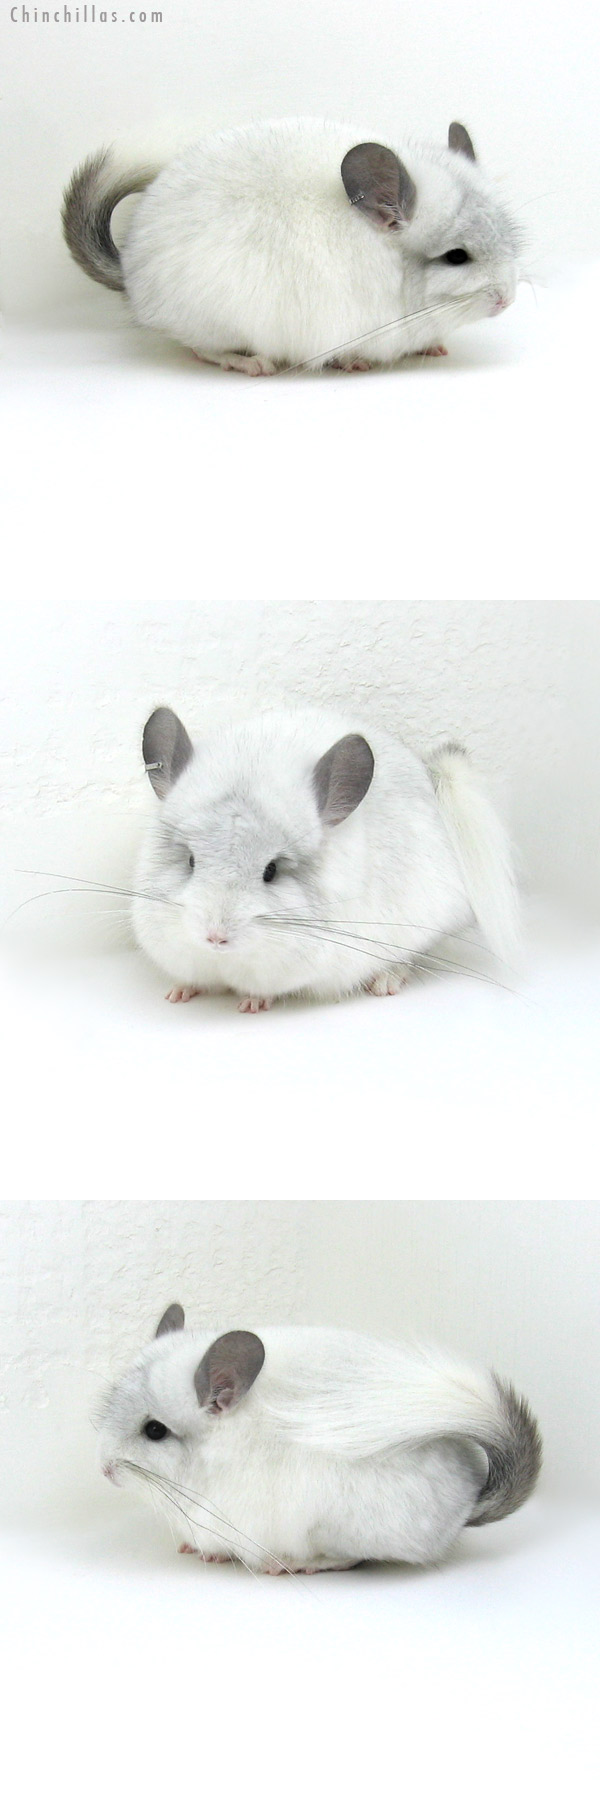 Chinchilla or related item offered for sale or export on Chinchillas.com - 12047 White Mosaic Royal Persian Angora Female Chinchilla